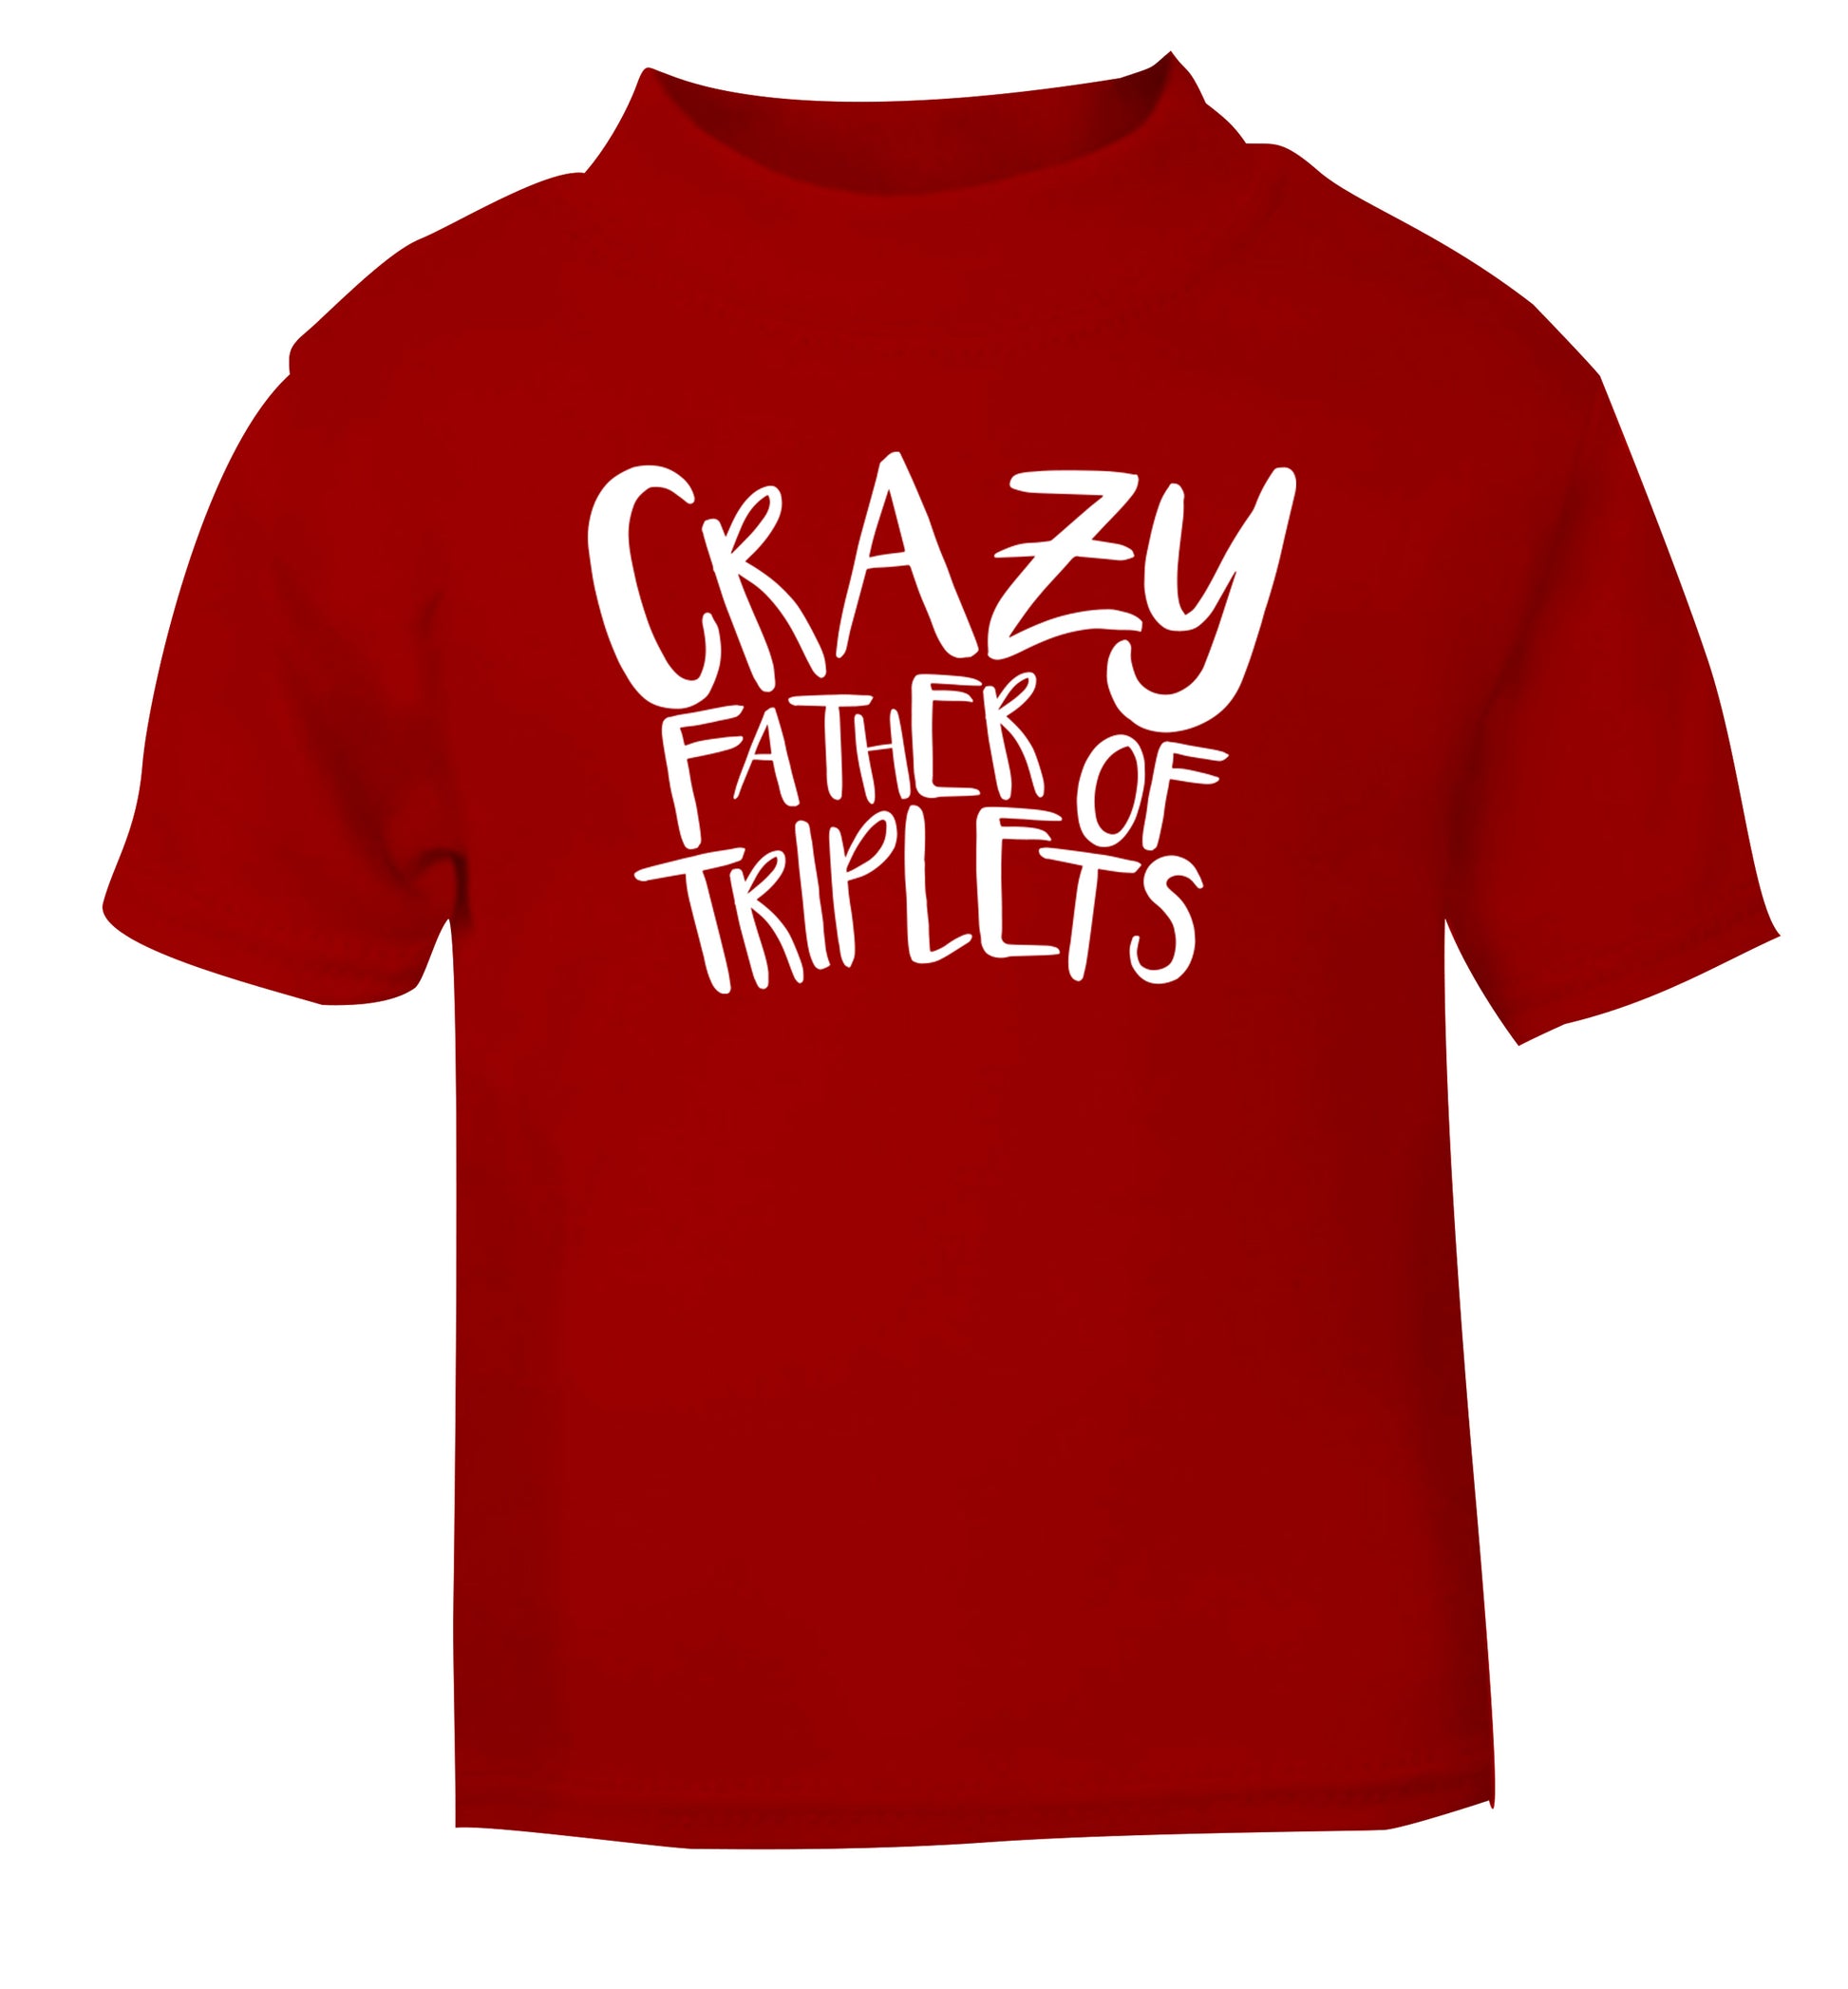 Crazy father of triplets red Baby Toddler Tshirt 2 Years